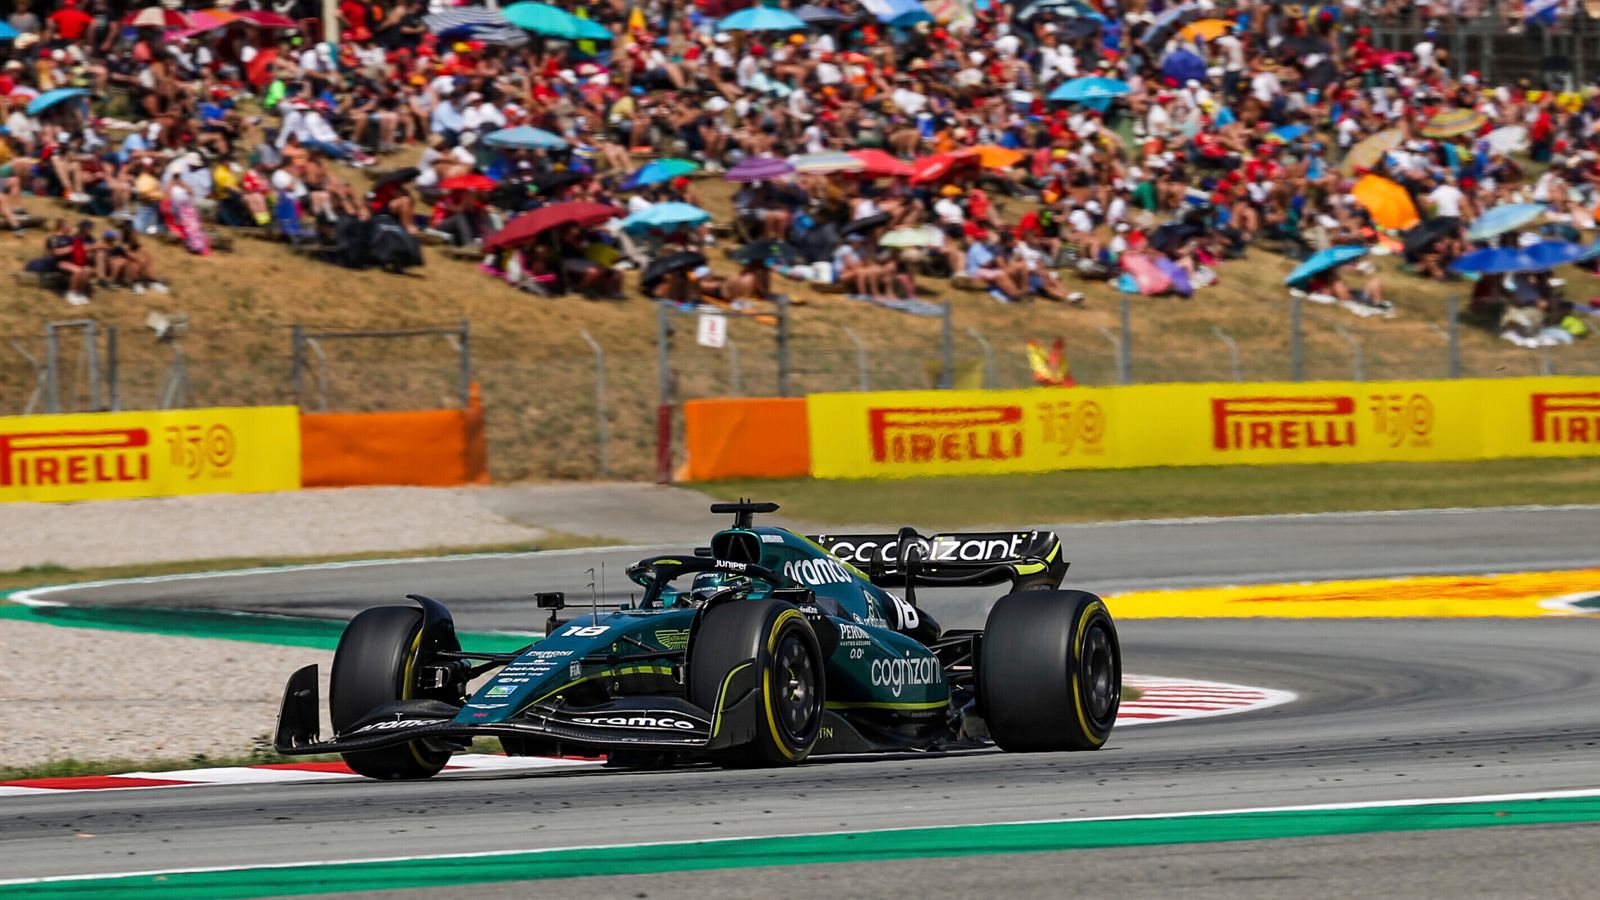 Spanish Grand Prix: When to watch practice, qualifying and the race on Sky Sports as F1 season continues